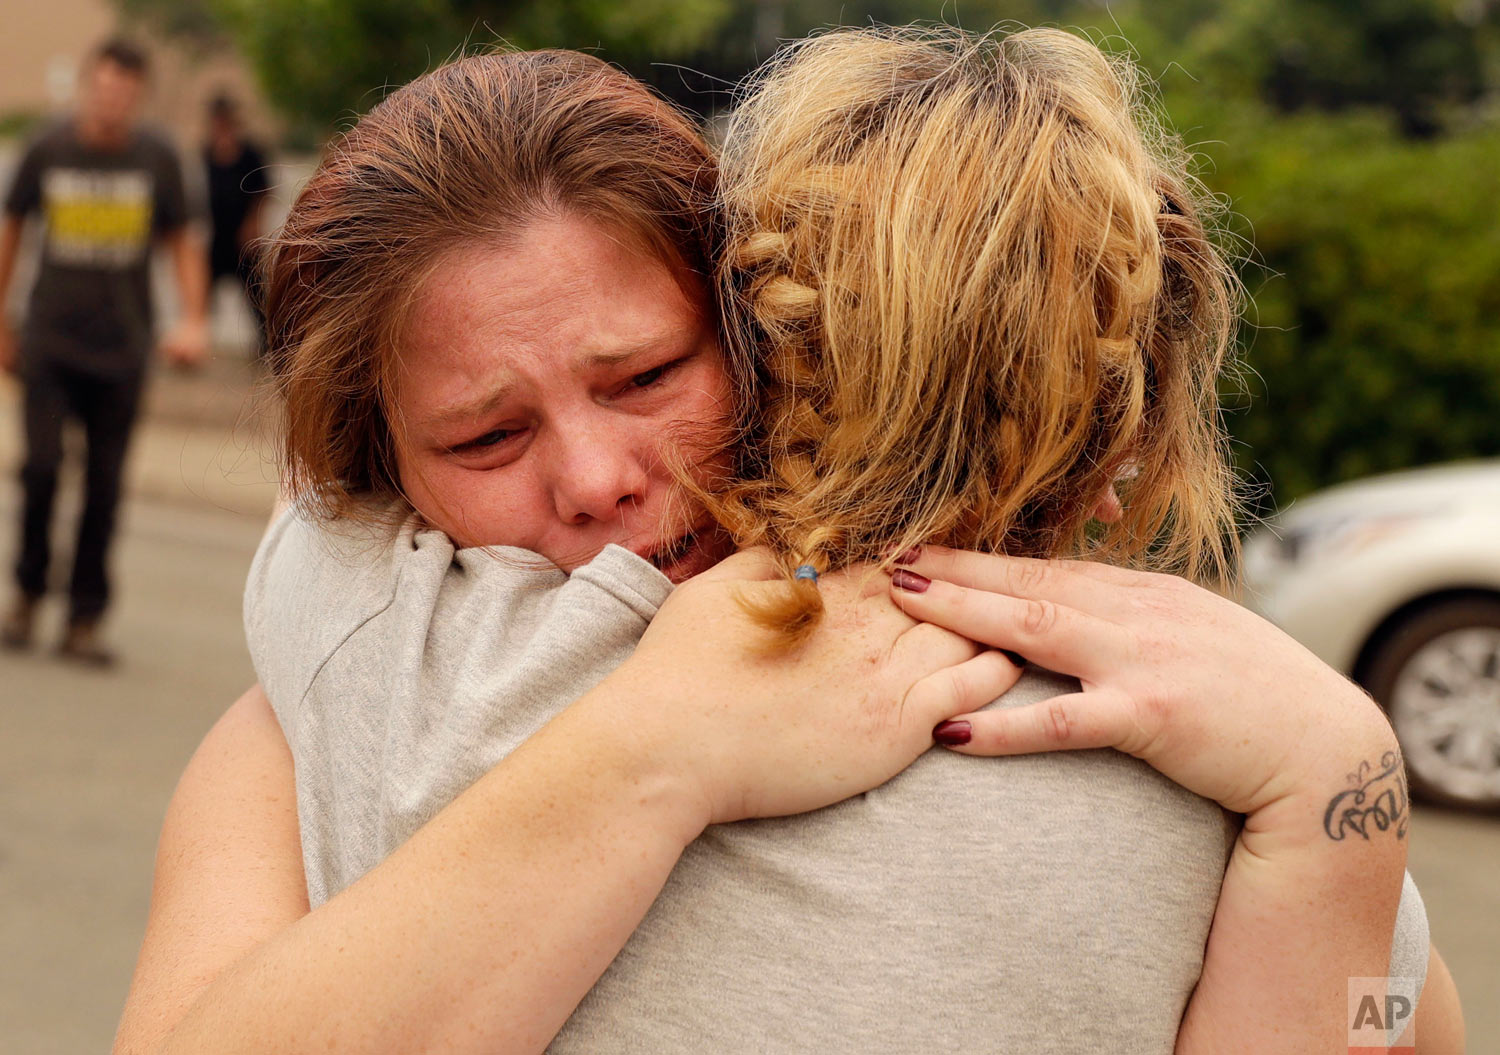  Carla Bledsoe, facing camera, hugs her sister, Sherry, outside of the sheriff's office in Redding, Calif., on Saturday, July 28, 2018, after hearing news that Sherry's children, James and Emily, and her grandmother, Melody Bledsoe, were killed in a 